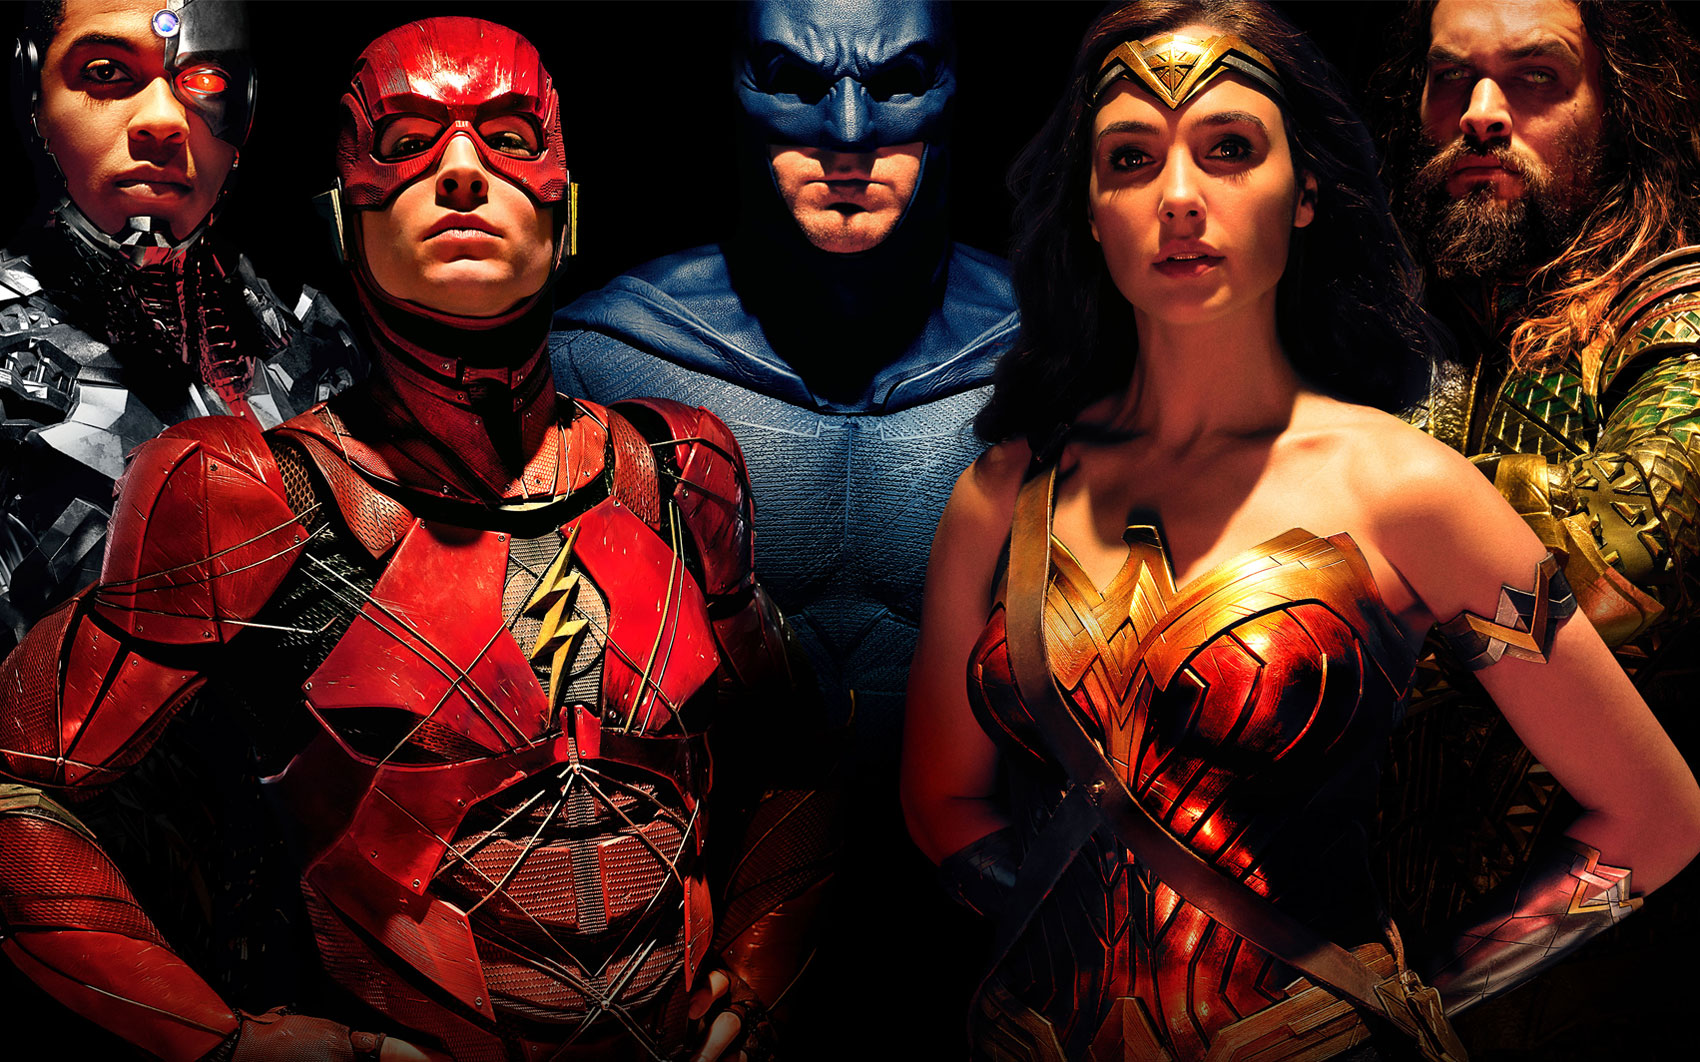 Justice League Will Have PG-13 Rating, With Zack Snyder Credited As Sole Director